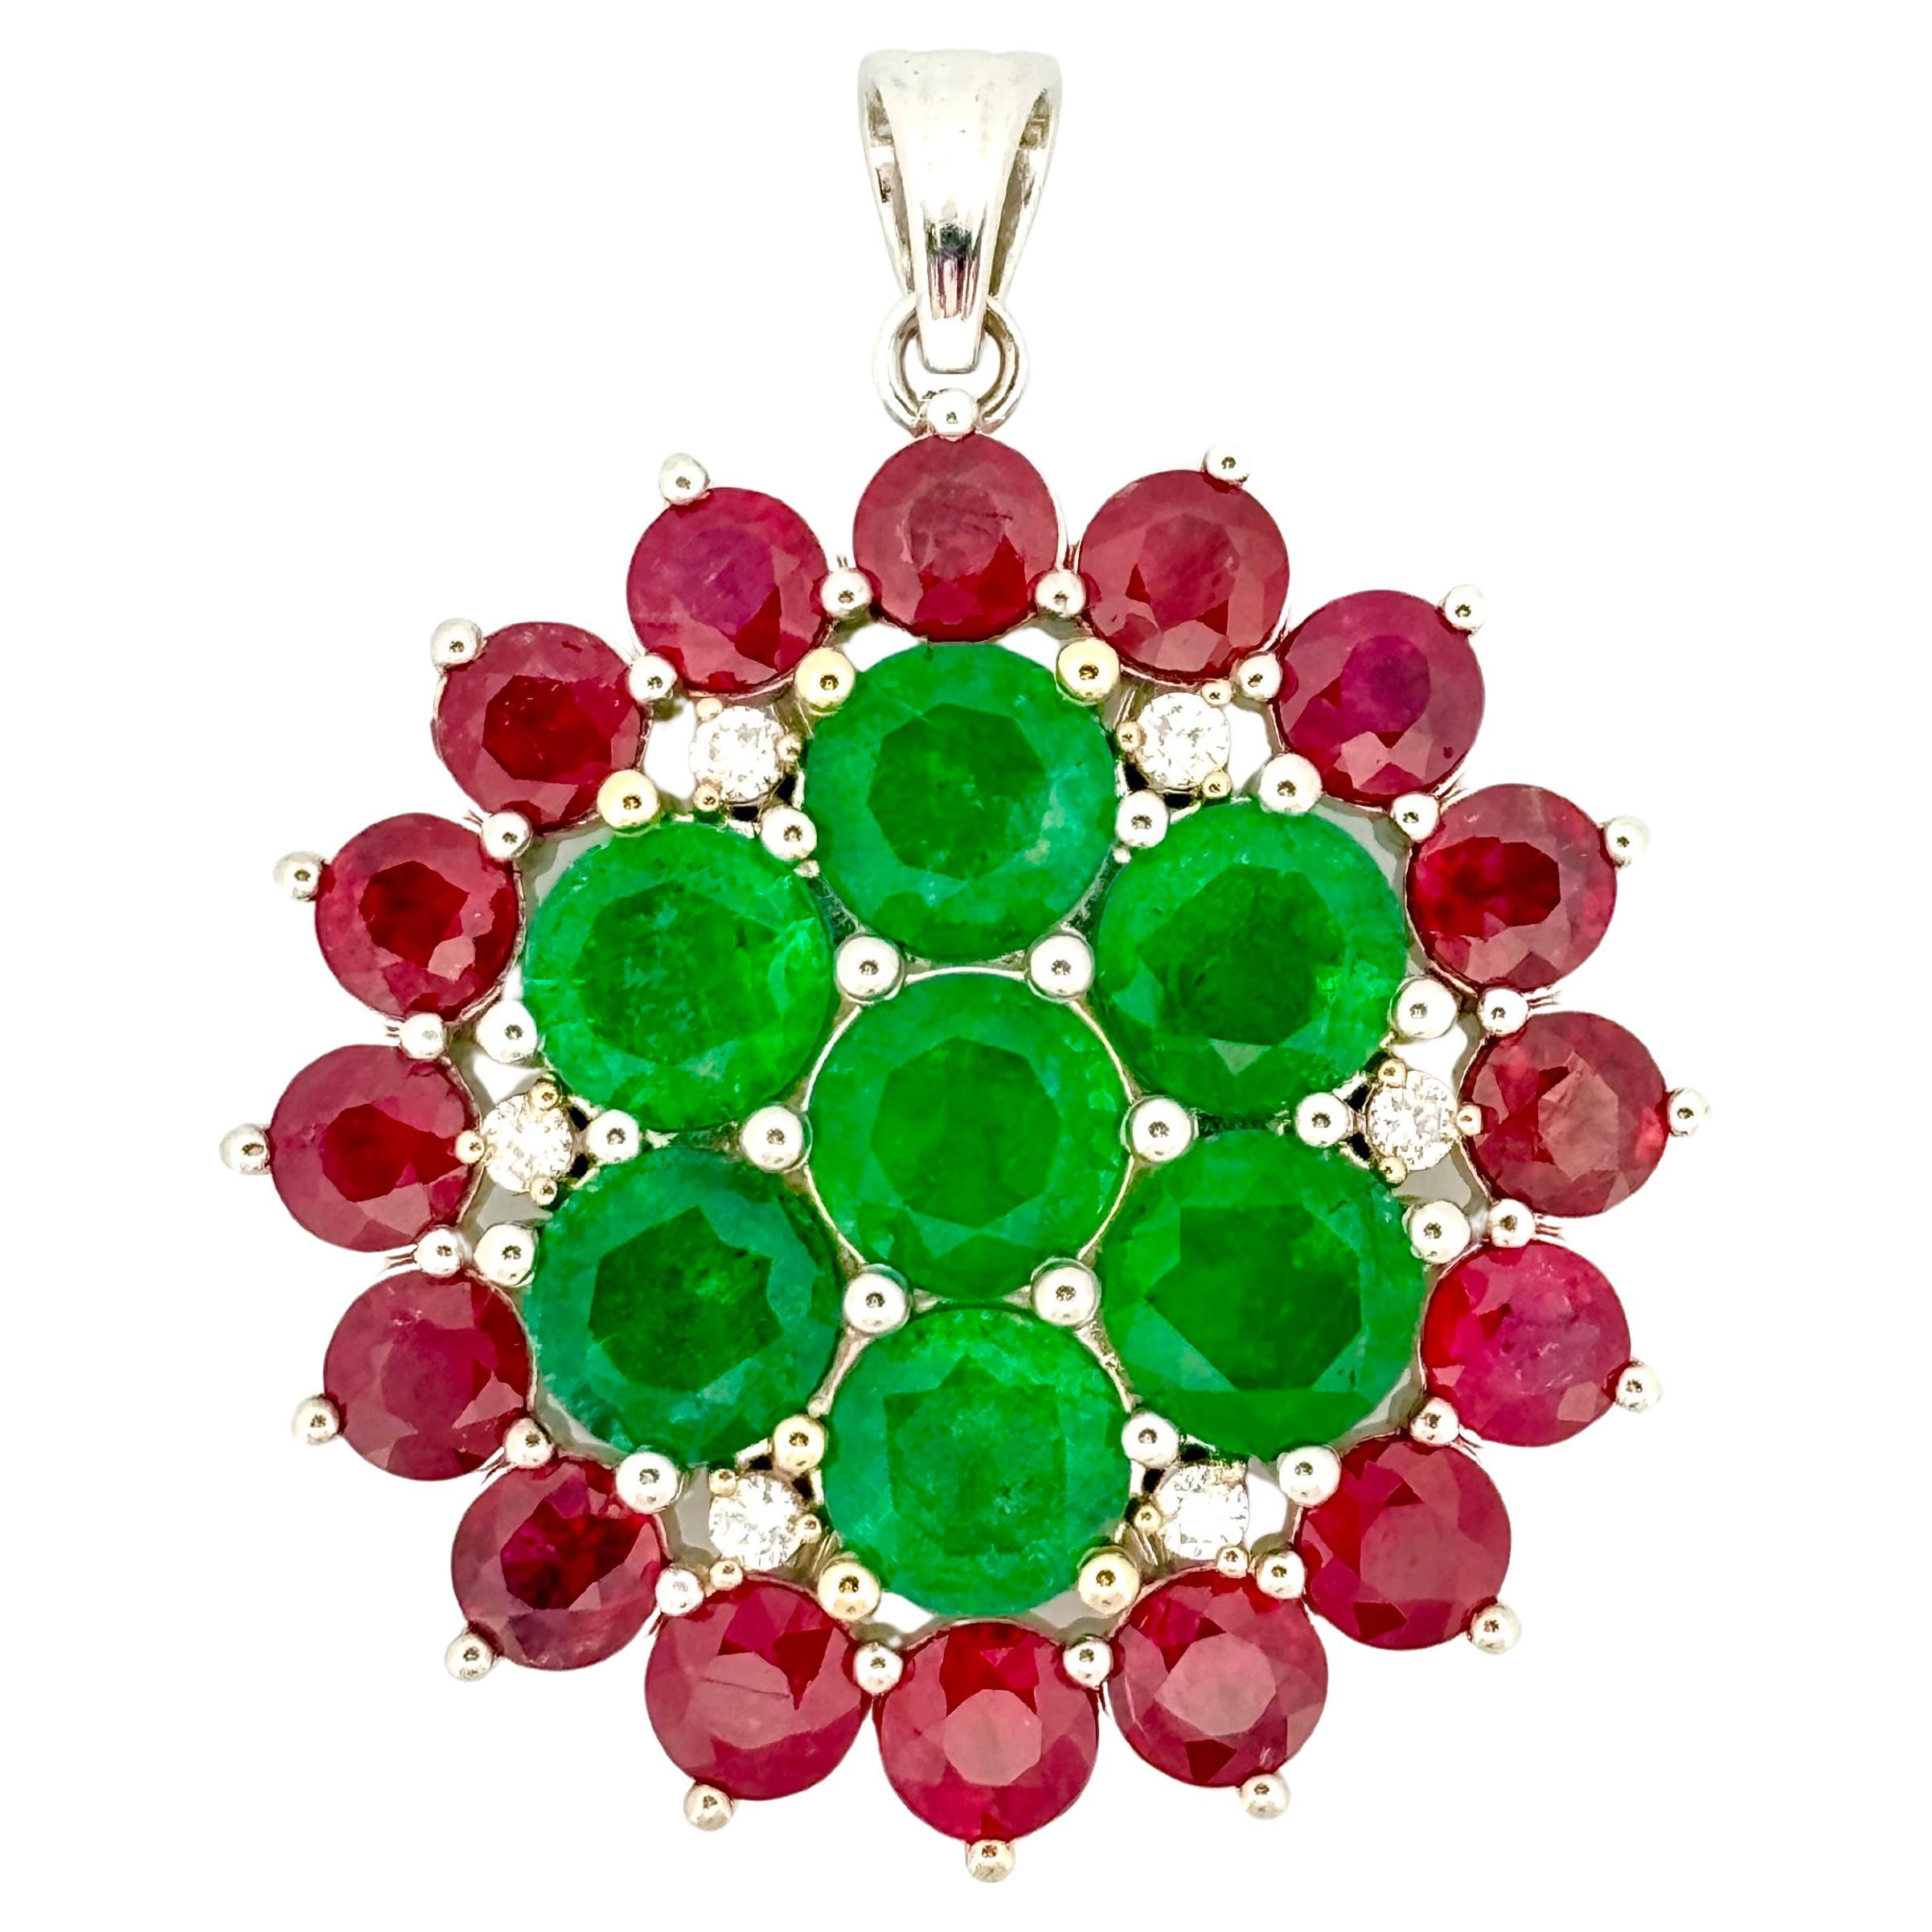 7.41 Ct Emerald, 6.94 Ct Ruby & 0.2 Ct Diamond studded Statement Pendant For Sale